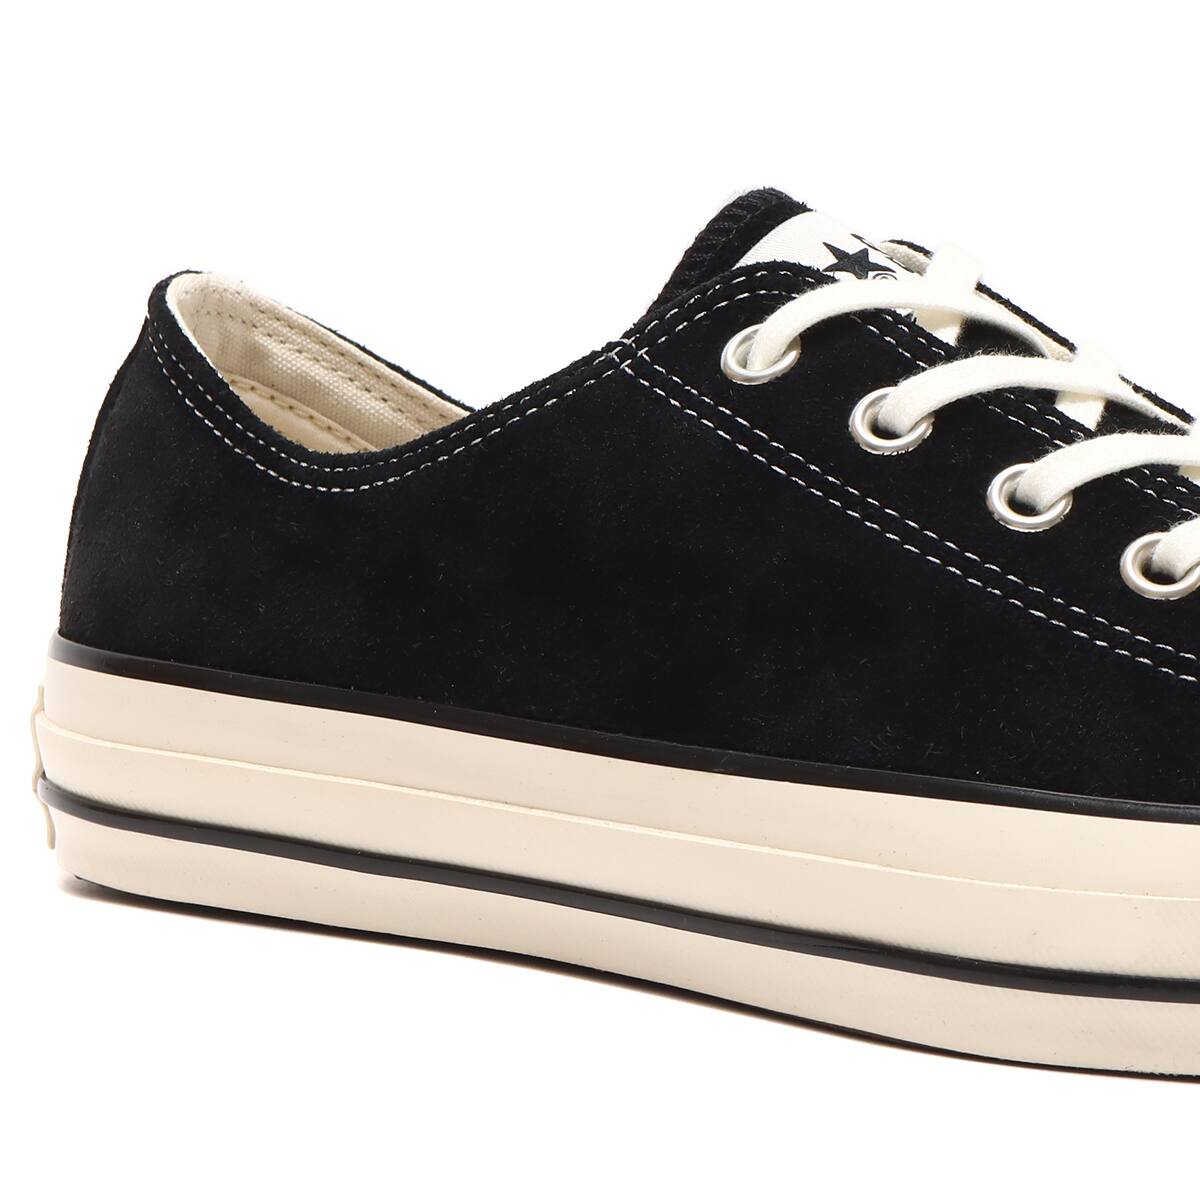 CONVERSE SUEDE ALL STAR US OX BLACK 23SS-I